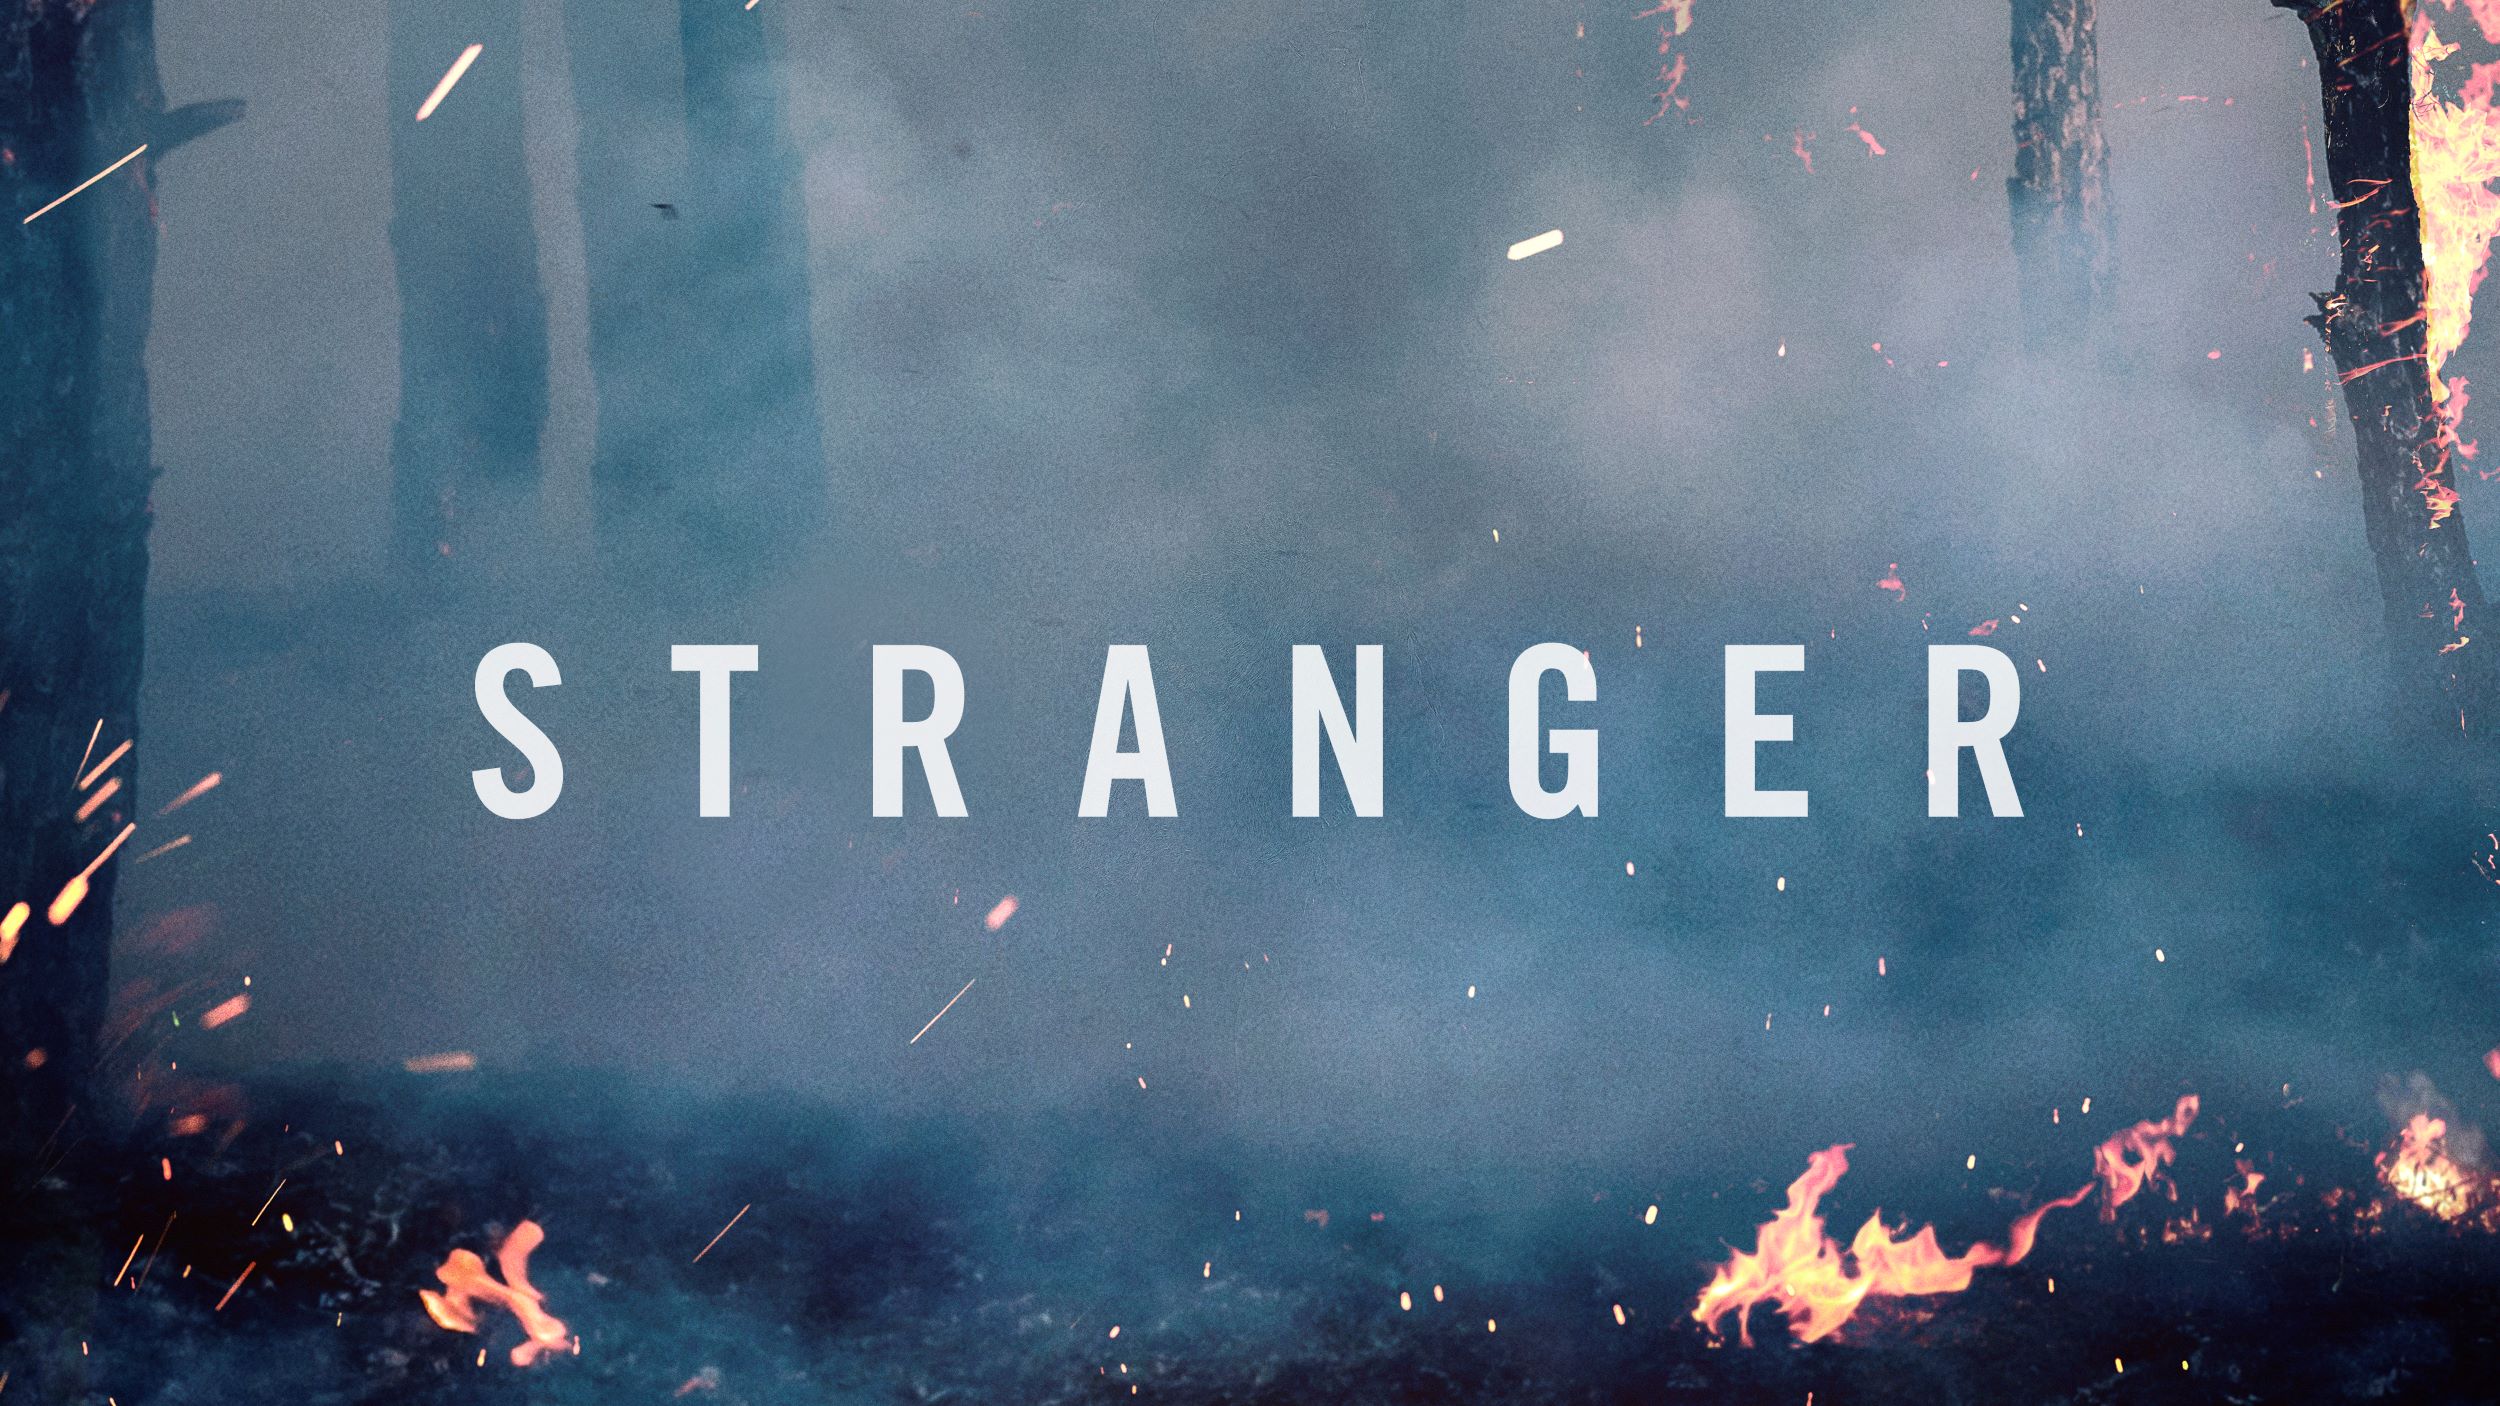 REINVENT PICKS UP EPIC ACTION DRAMA ‘STRANGER’ FROM DANISH PRODUCTION HOUSE MOTOR